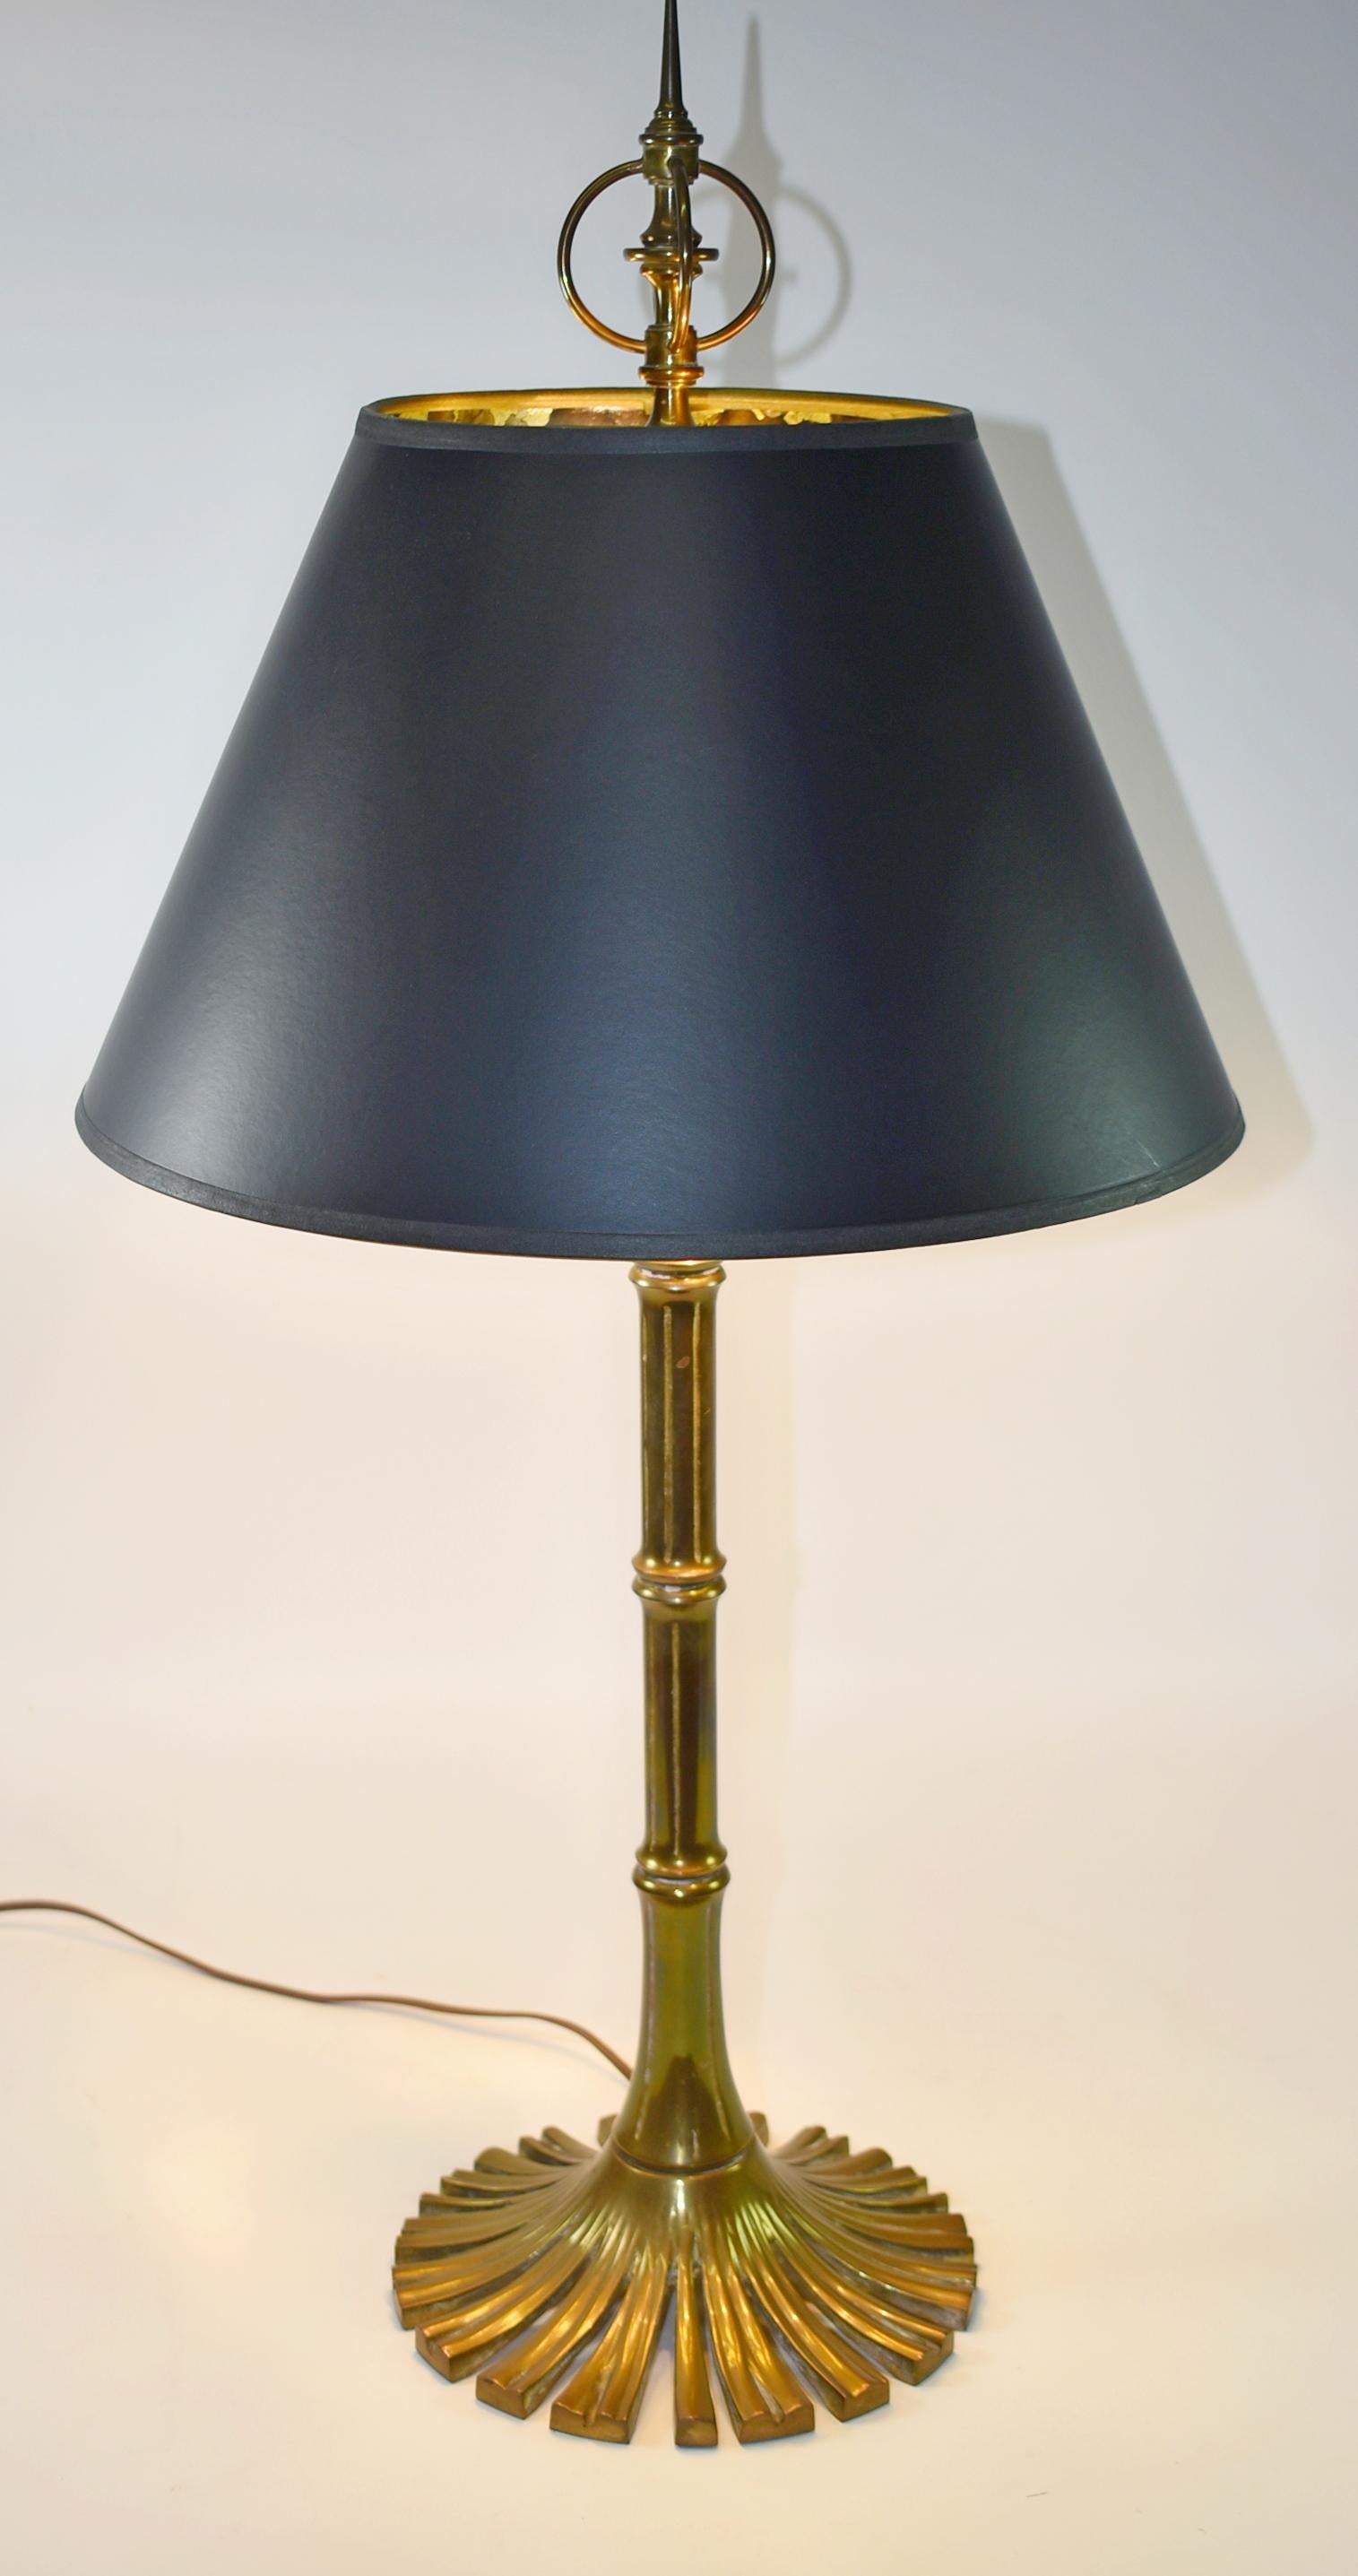 Chapman brass bamboo table lamp, Circa 1976. Cast brass lamp with bamboo details. Base is fan shaped circle of reeds. Two original sockets with tags dated 1976 with pull chains. Comes with 14